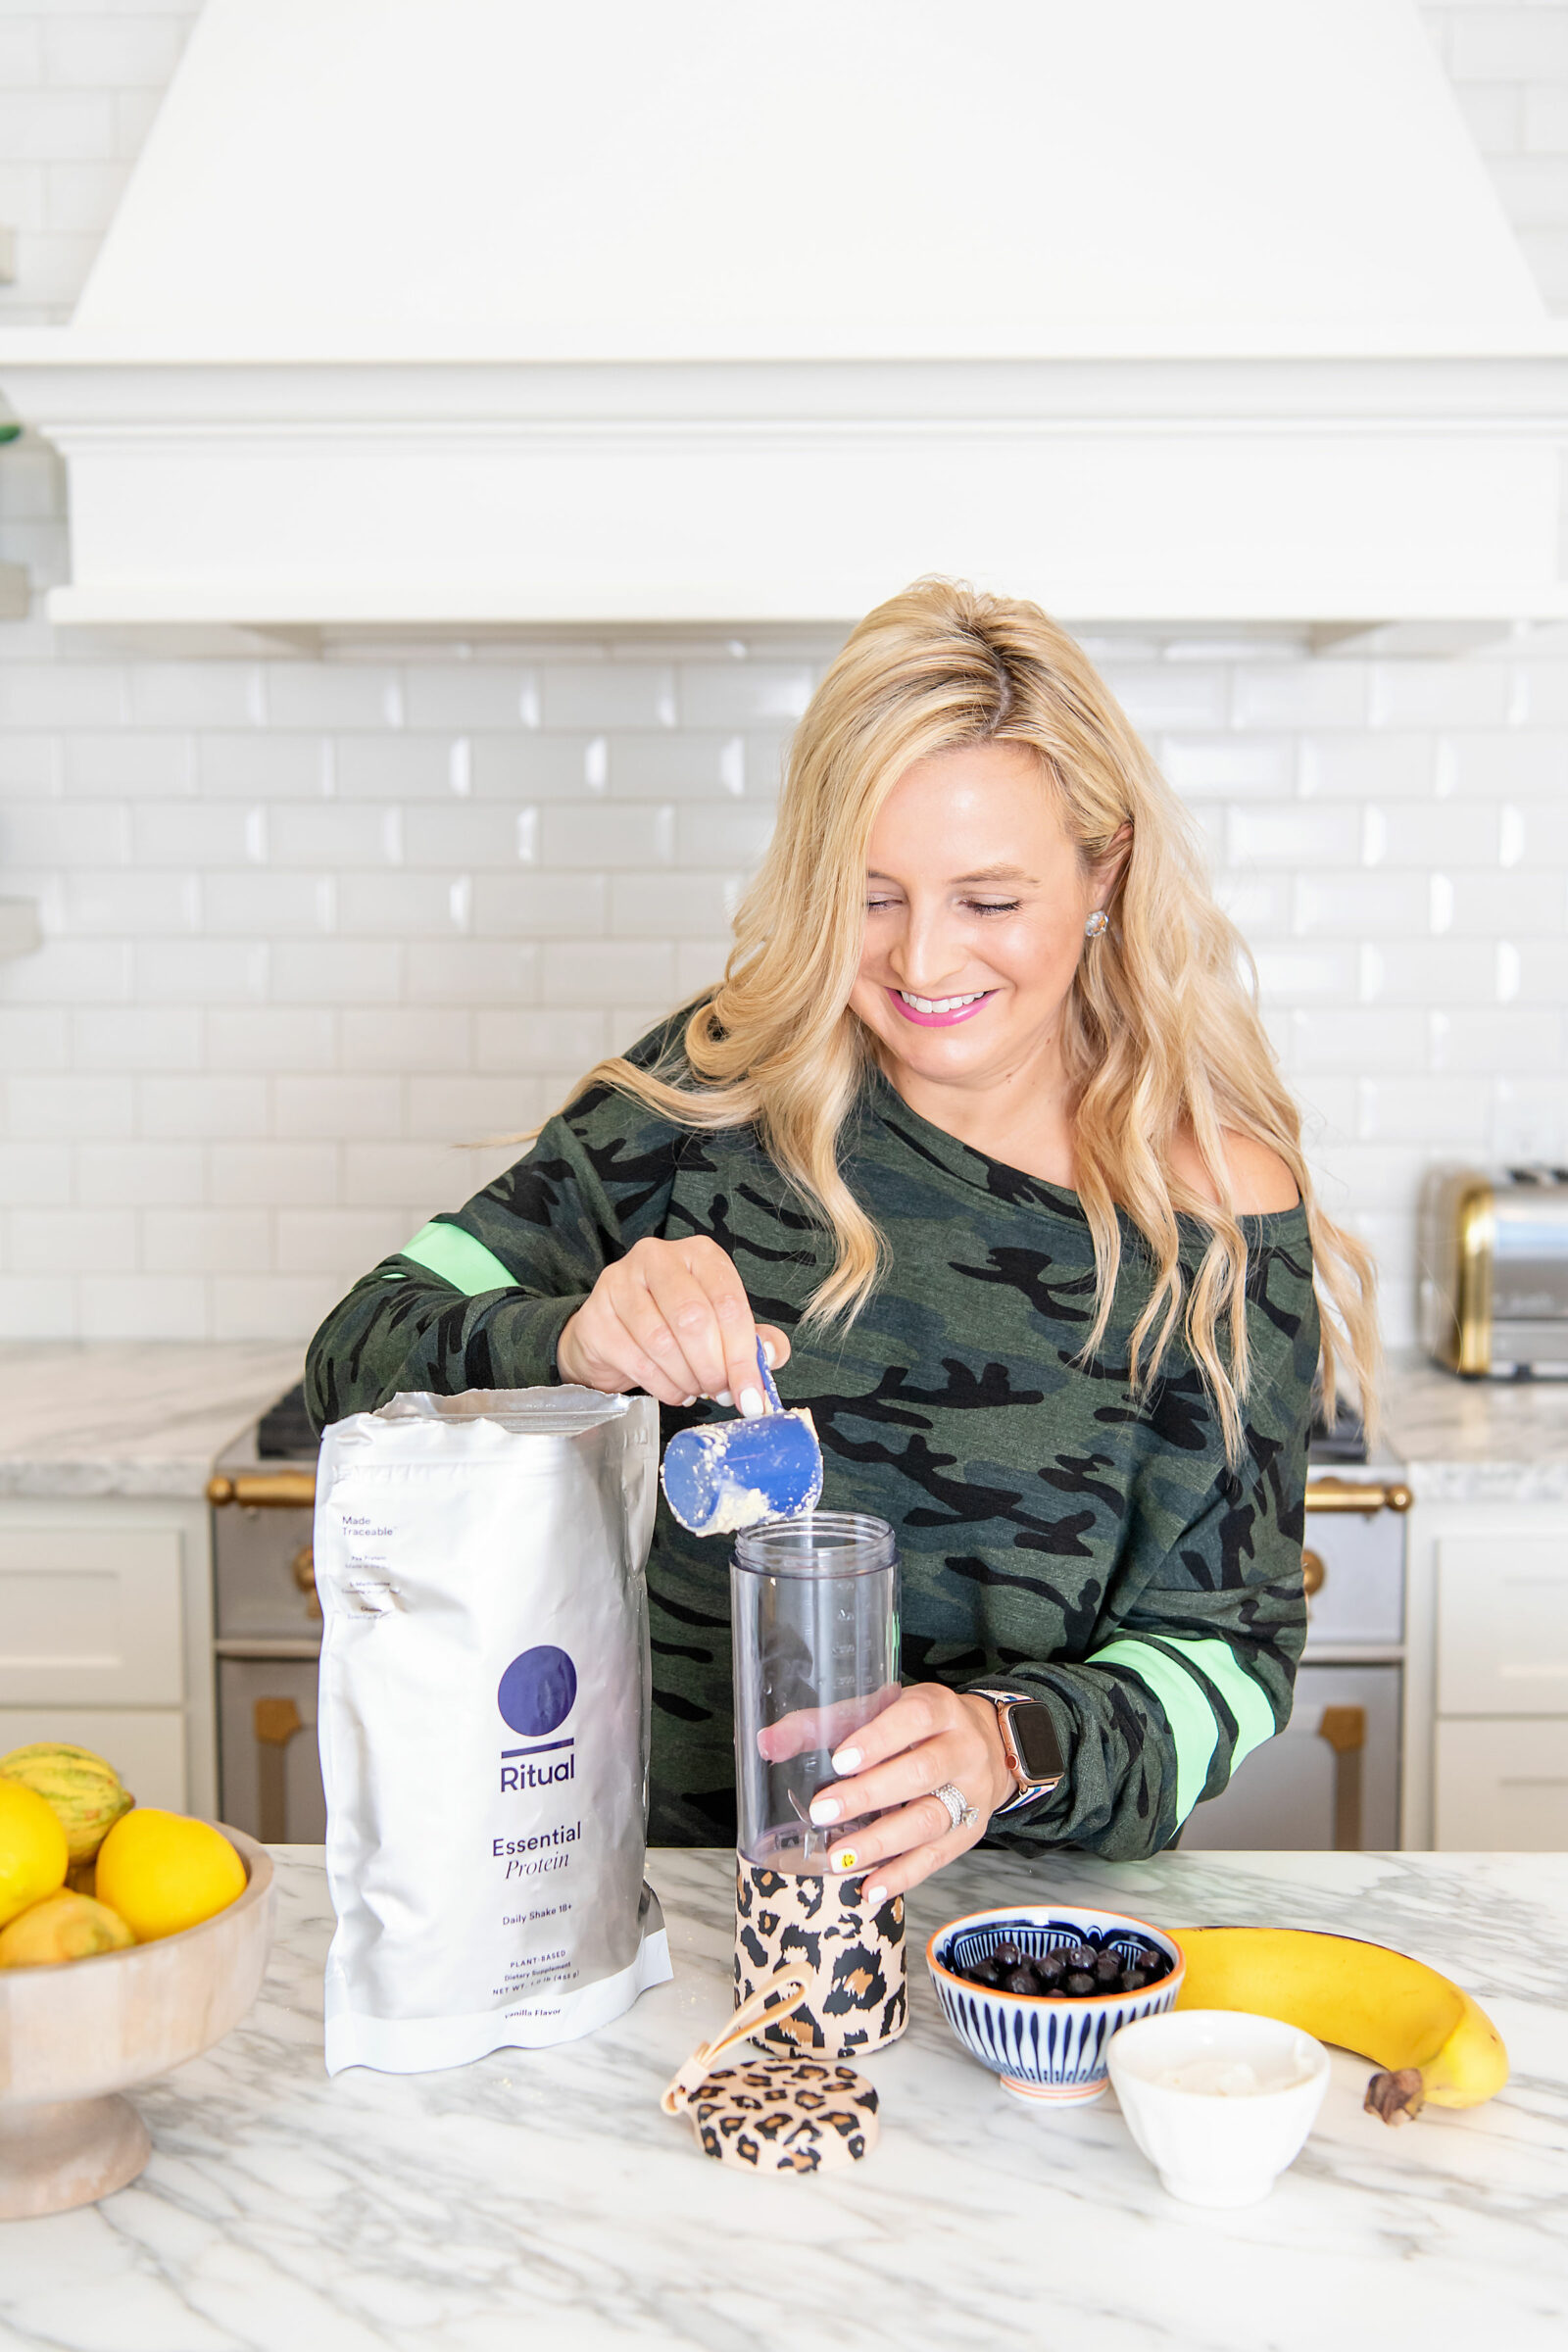 Healthy Living by popular Houston lifestyle blog, The House of Fancy: image of a woman wearing a camo top and putting ritual powder in a leopard print cup. 